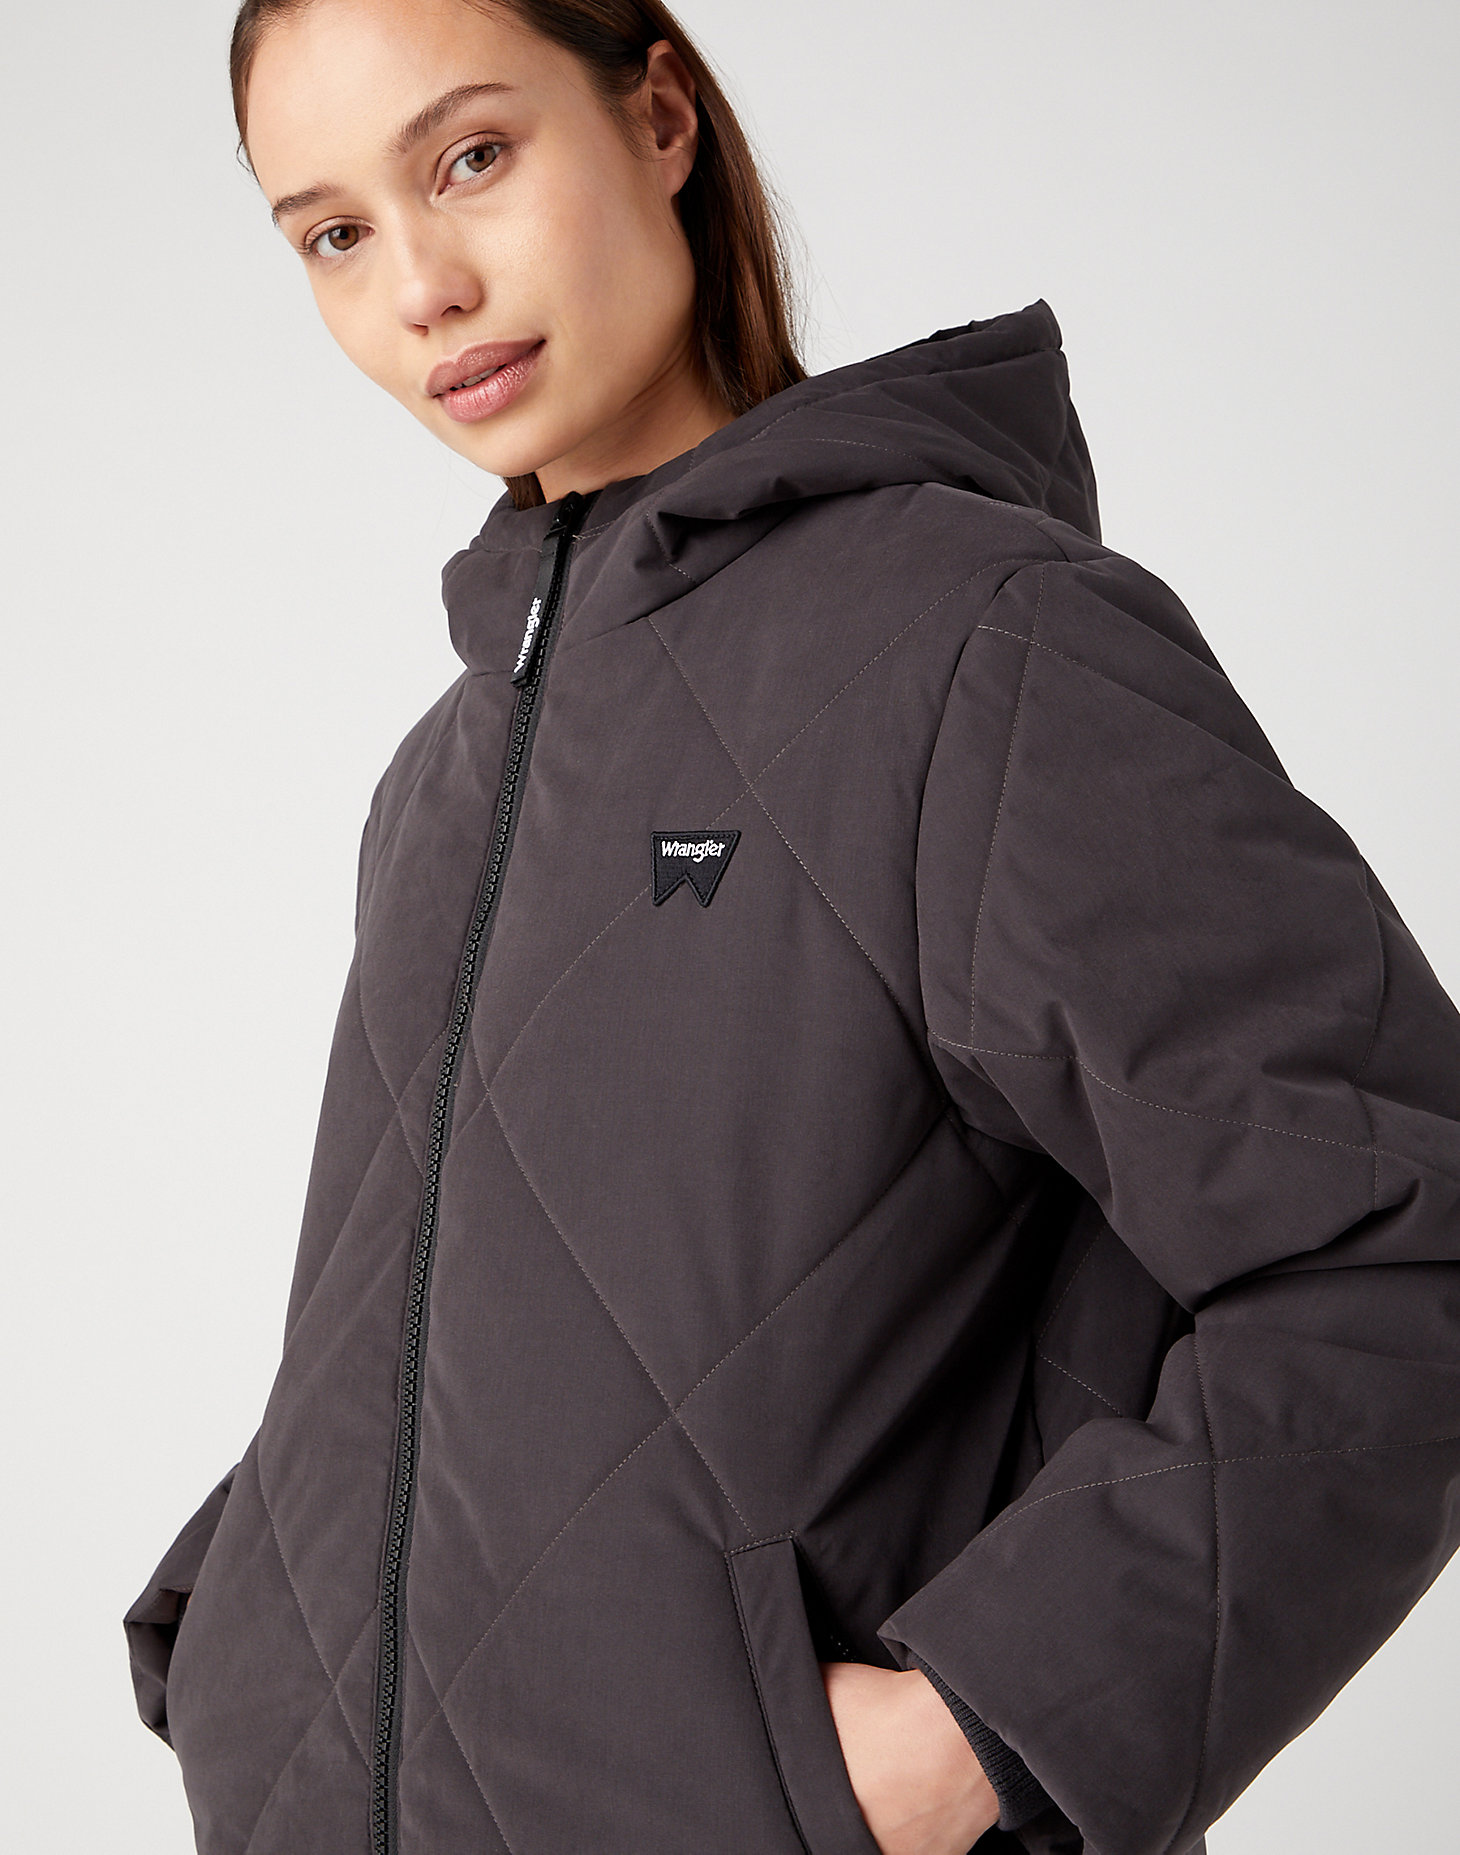 Long Quilted Jacket in Faded Black alternative view 3